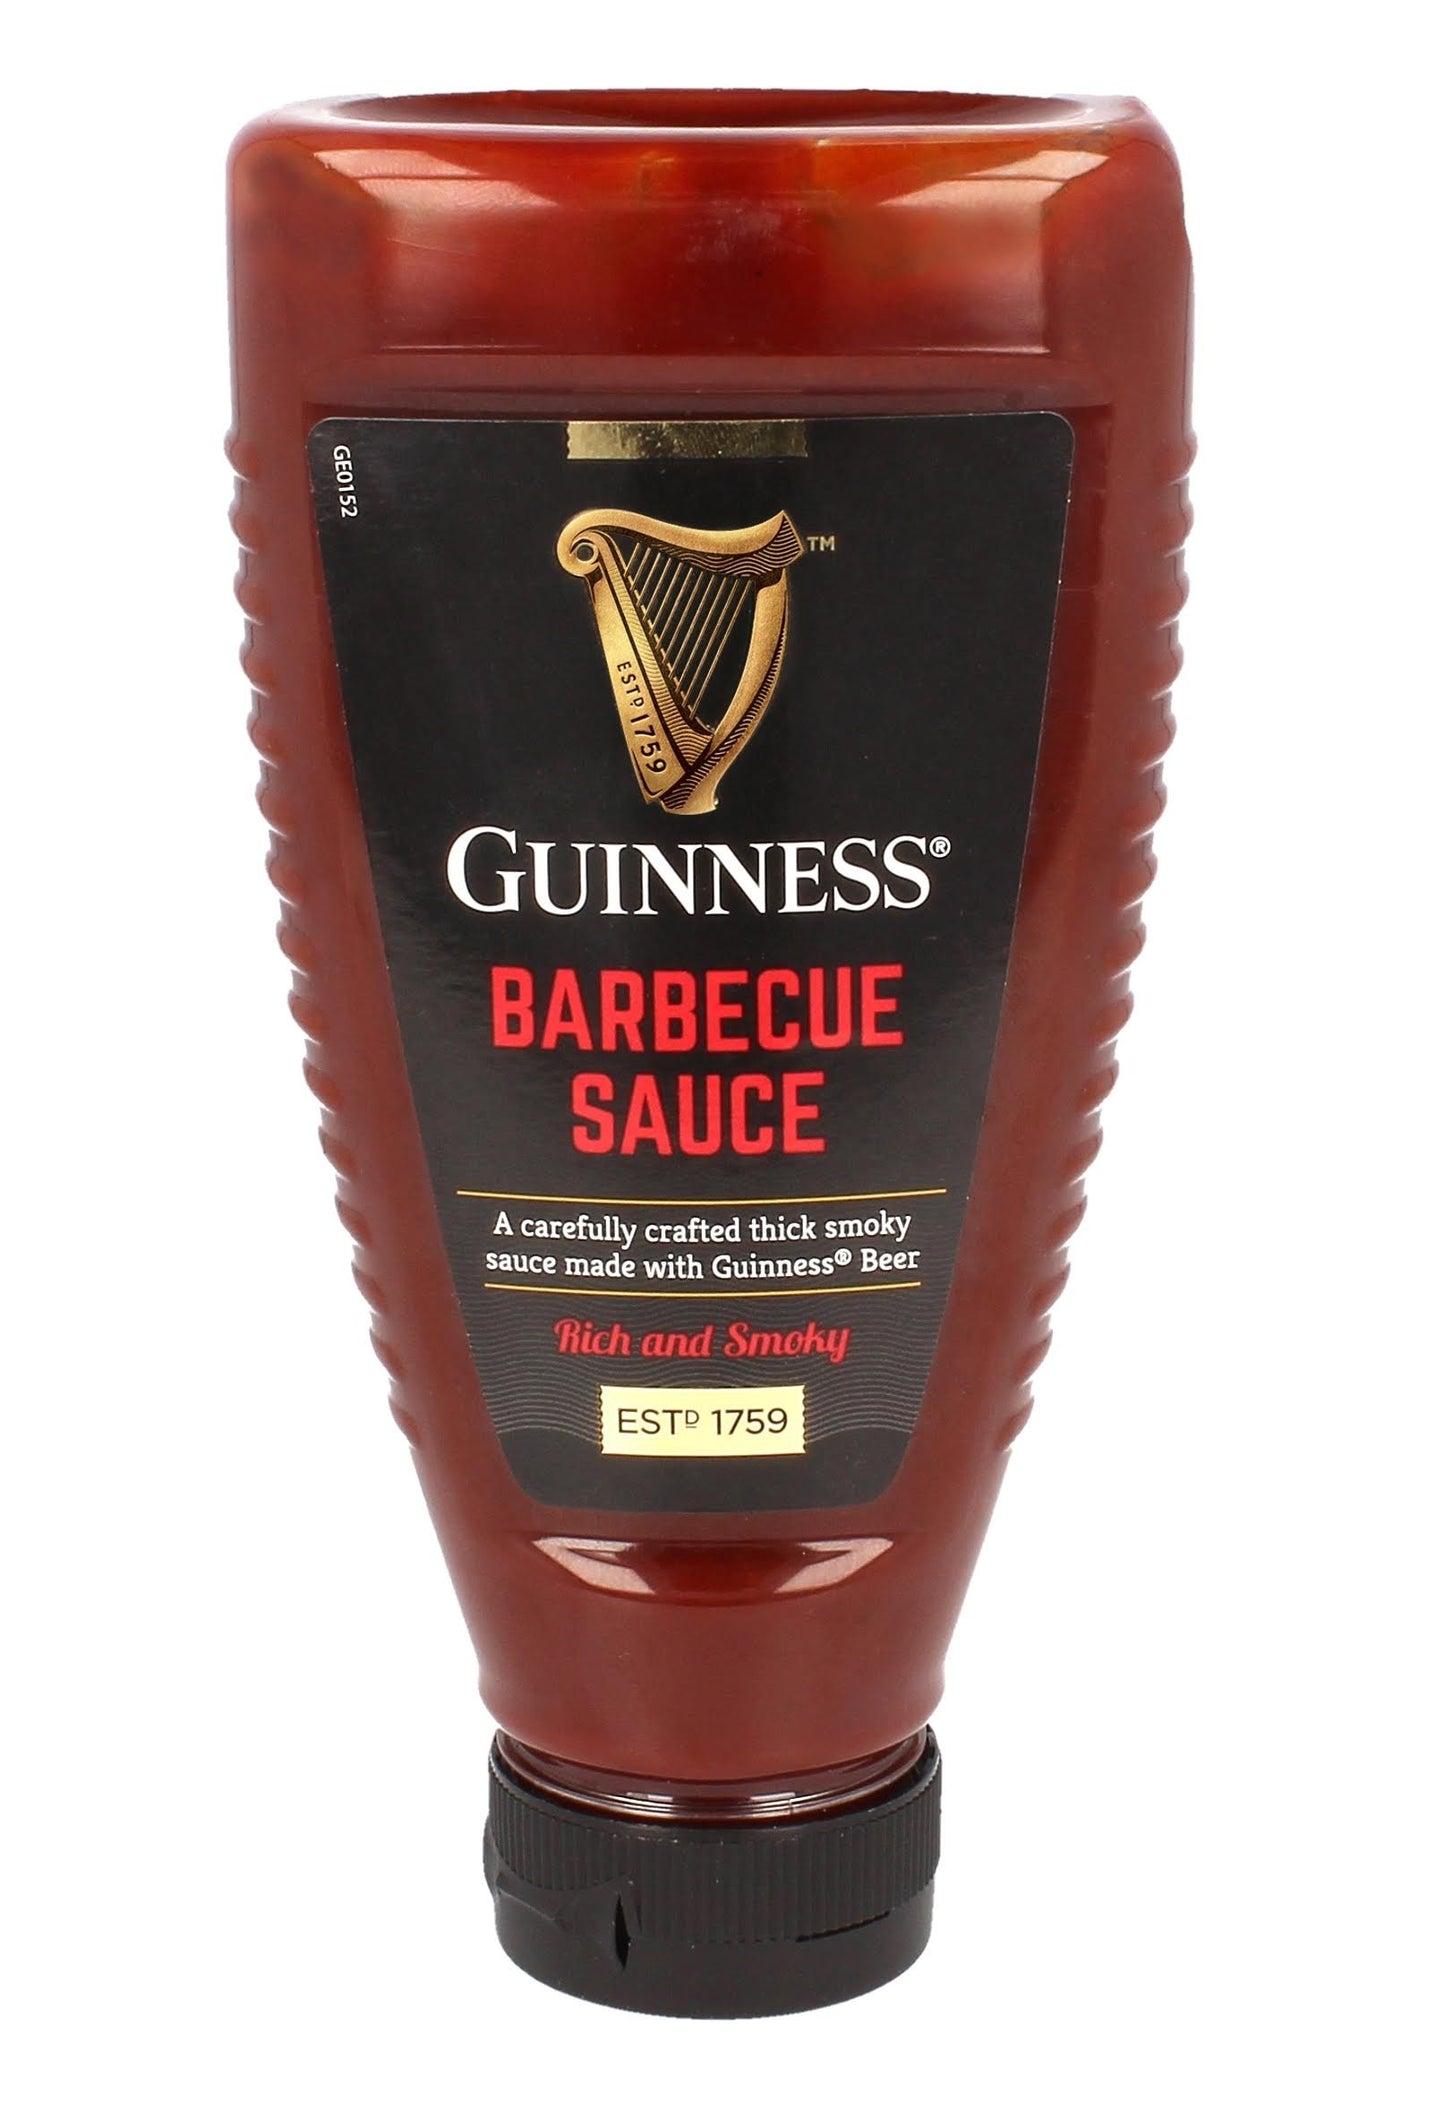 Guinness Barbecue Sauce 300g